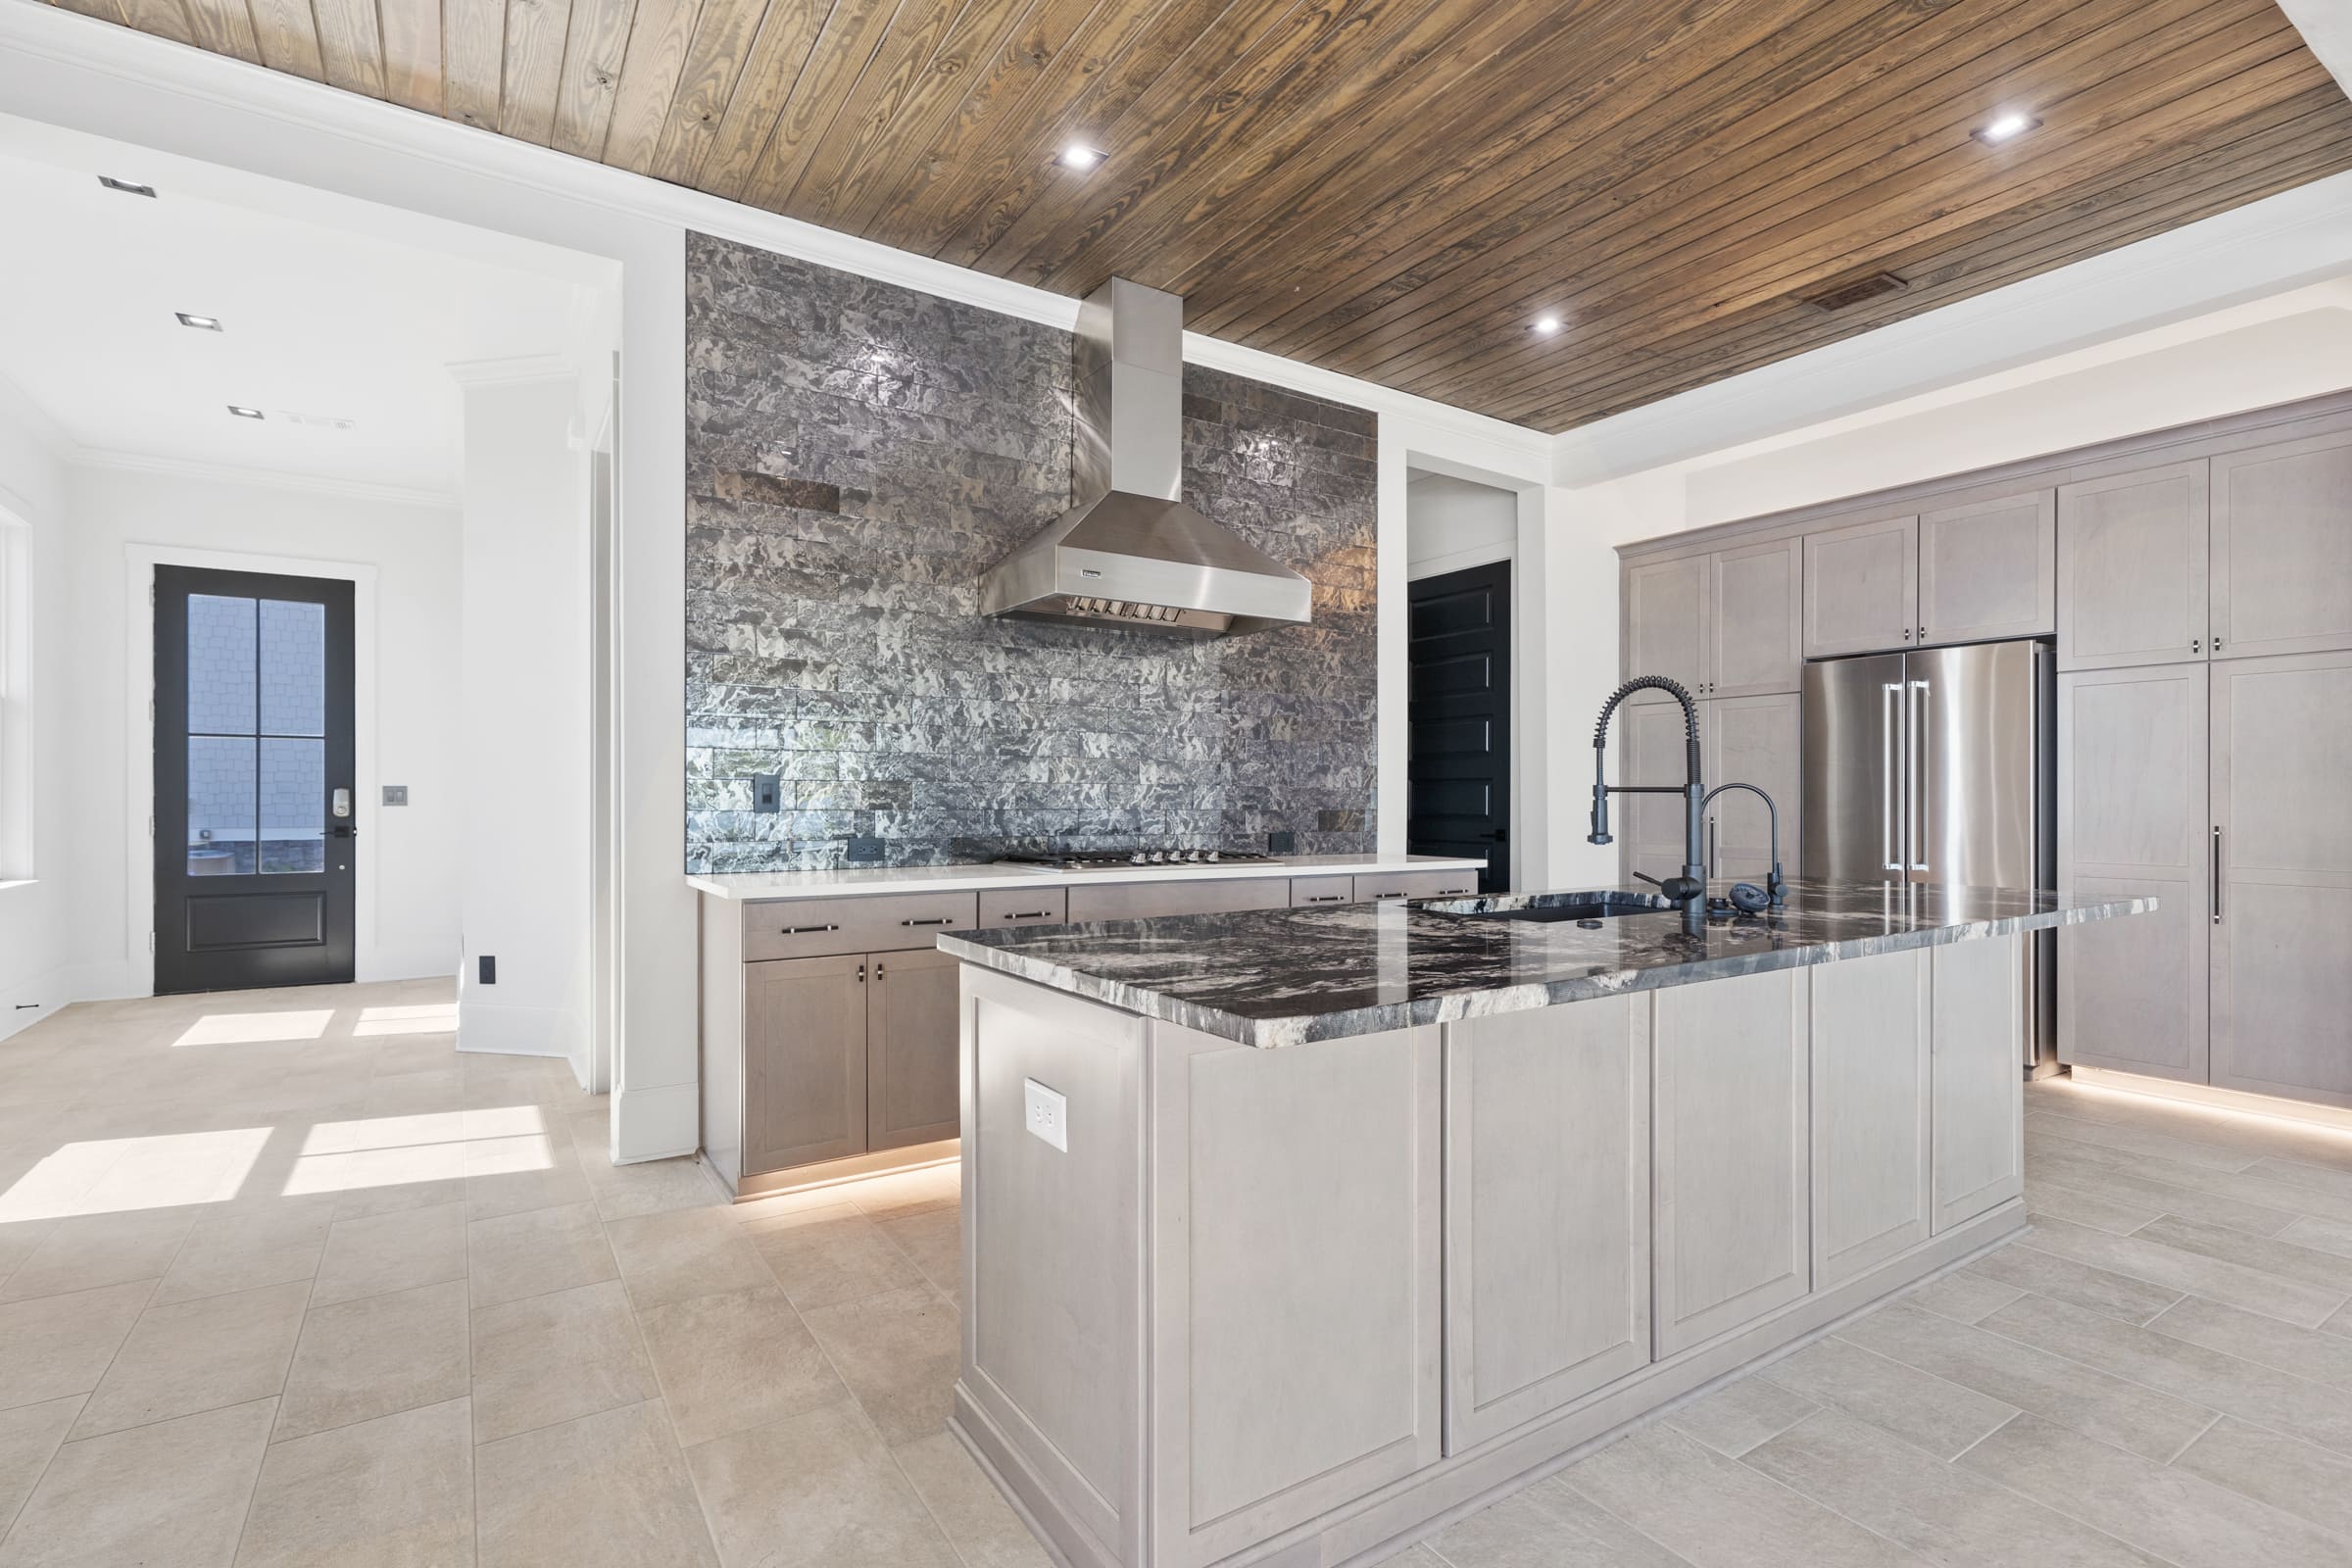 Full Kitchen View with Back Stone Kitchen Wall |PAXISgroup